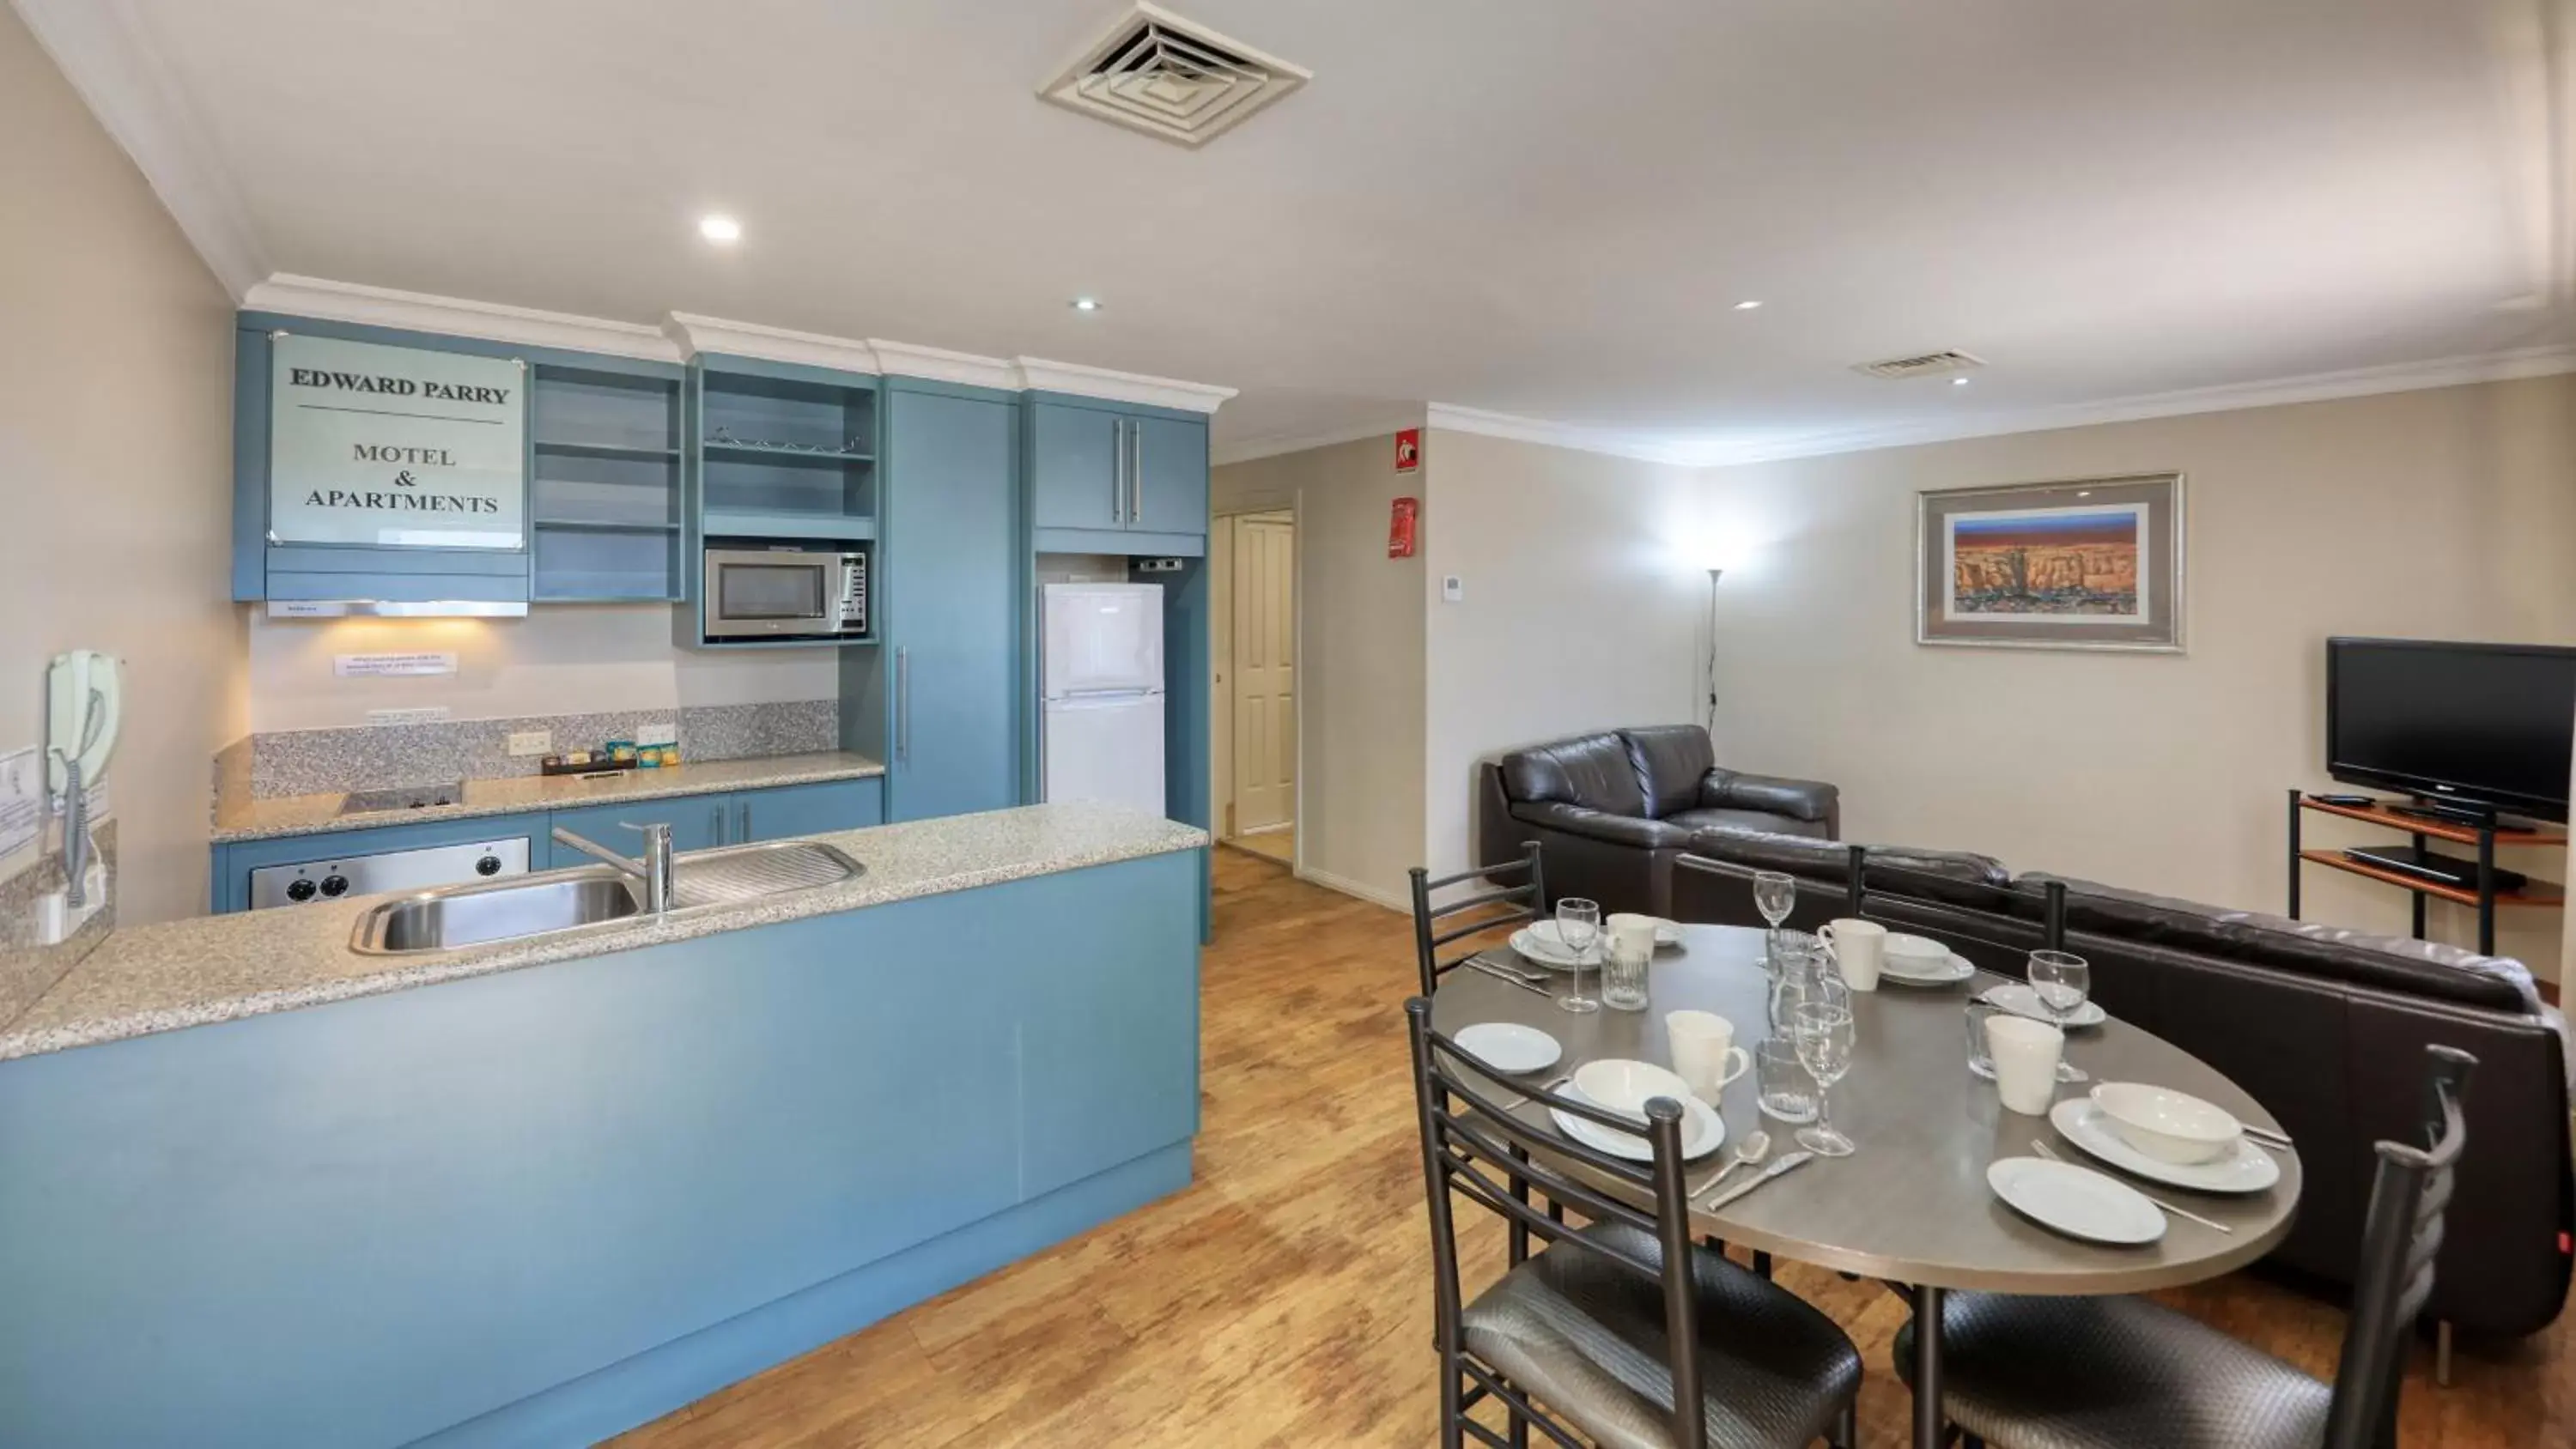 Dining area, Kitchen/Kitchenette in Edward Parry Motel and Apartments